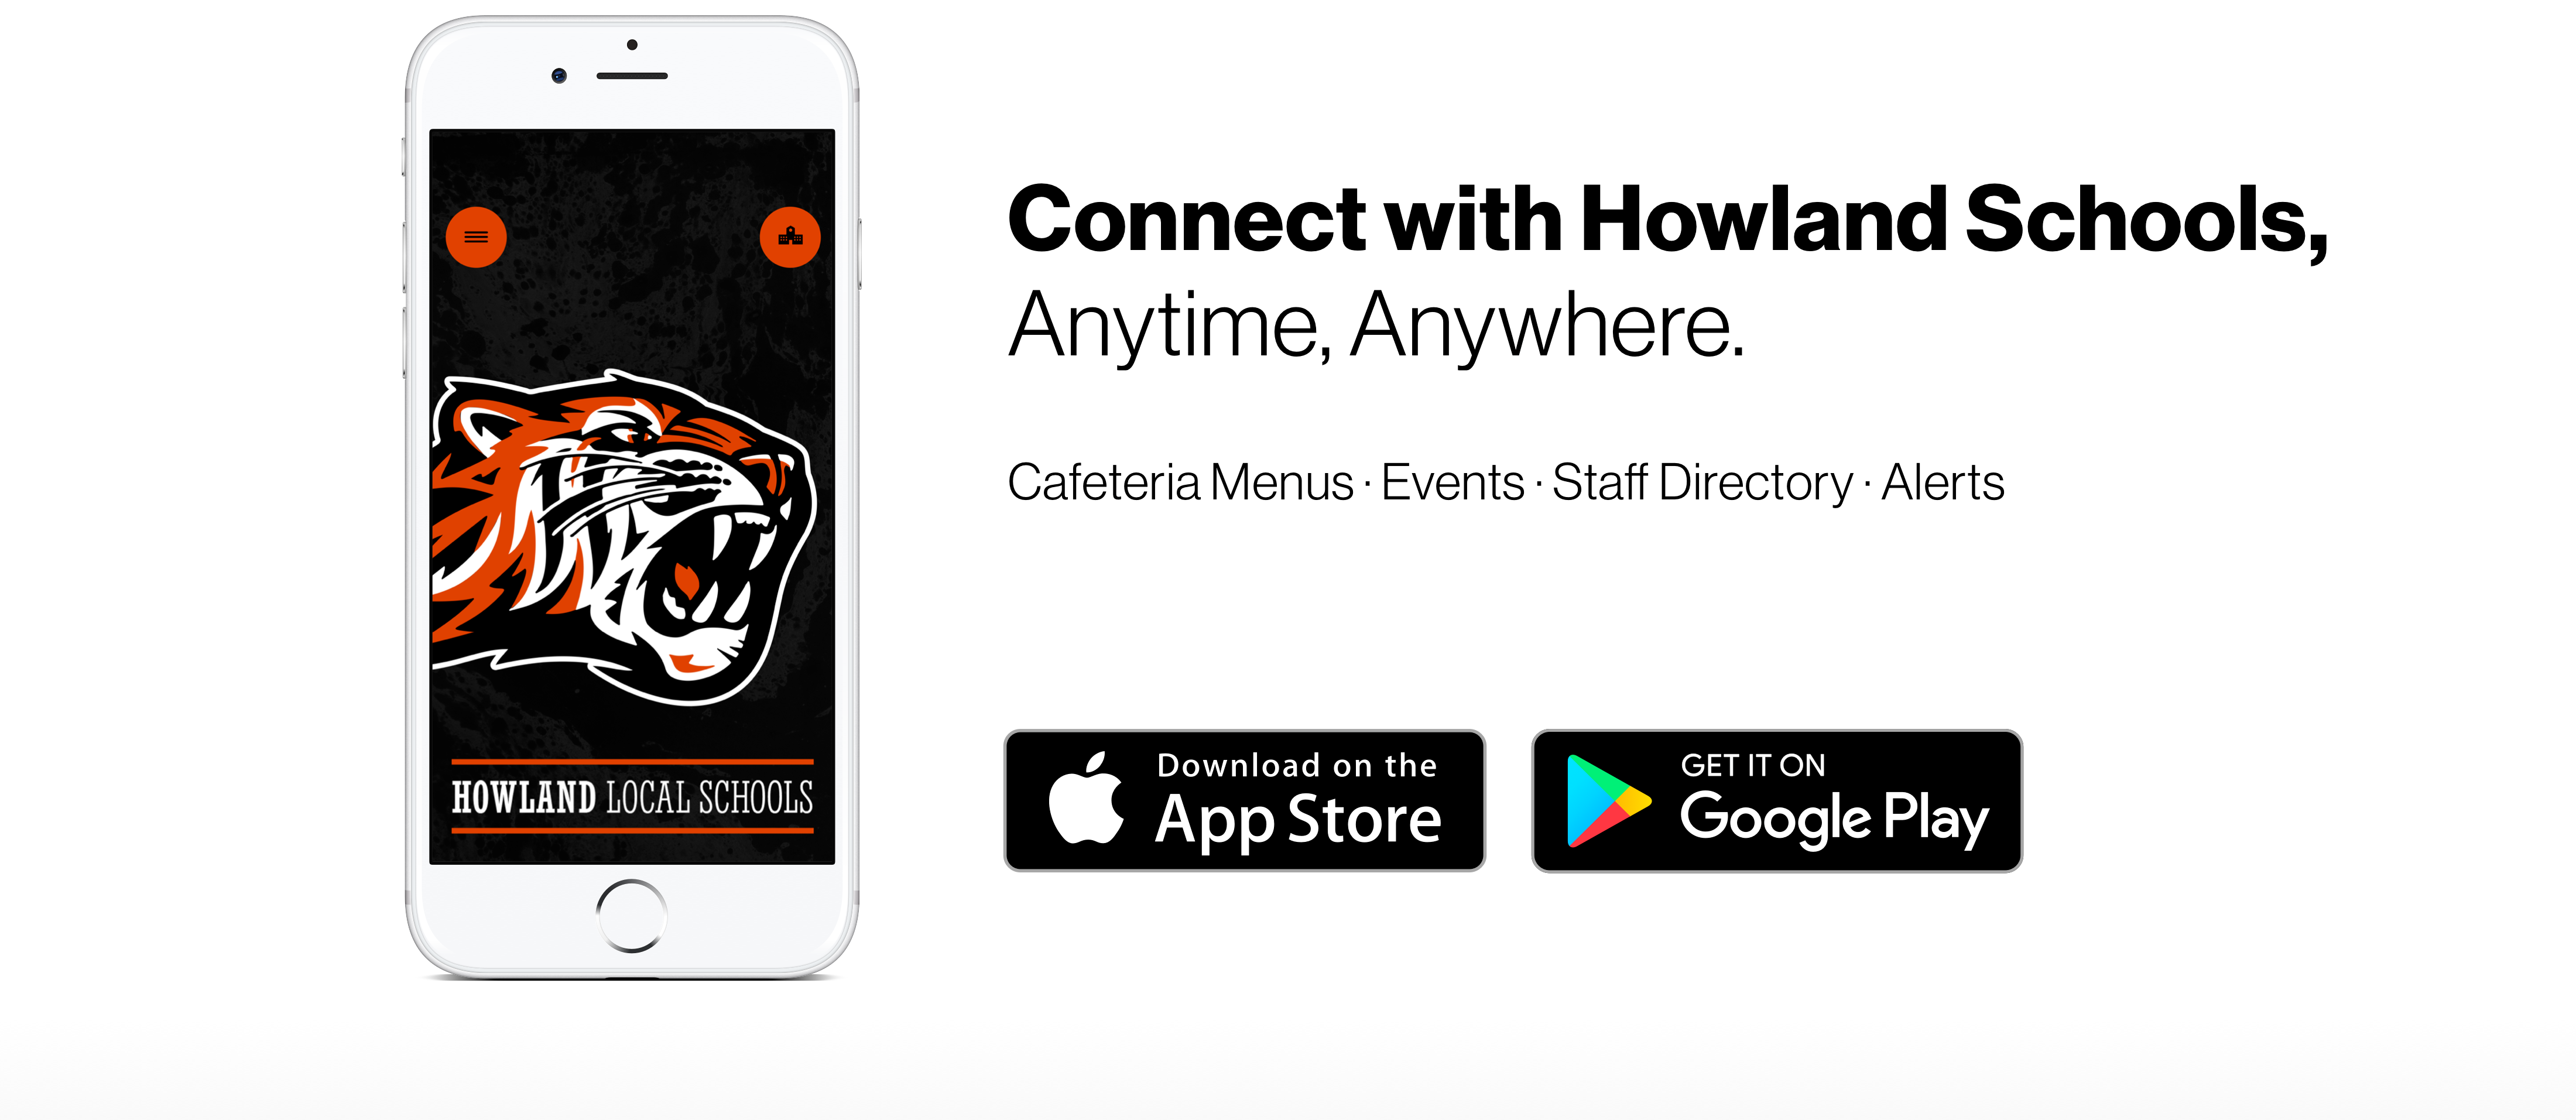 Connect with Howland